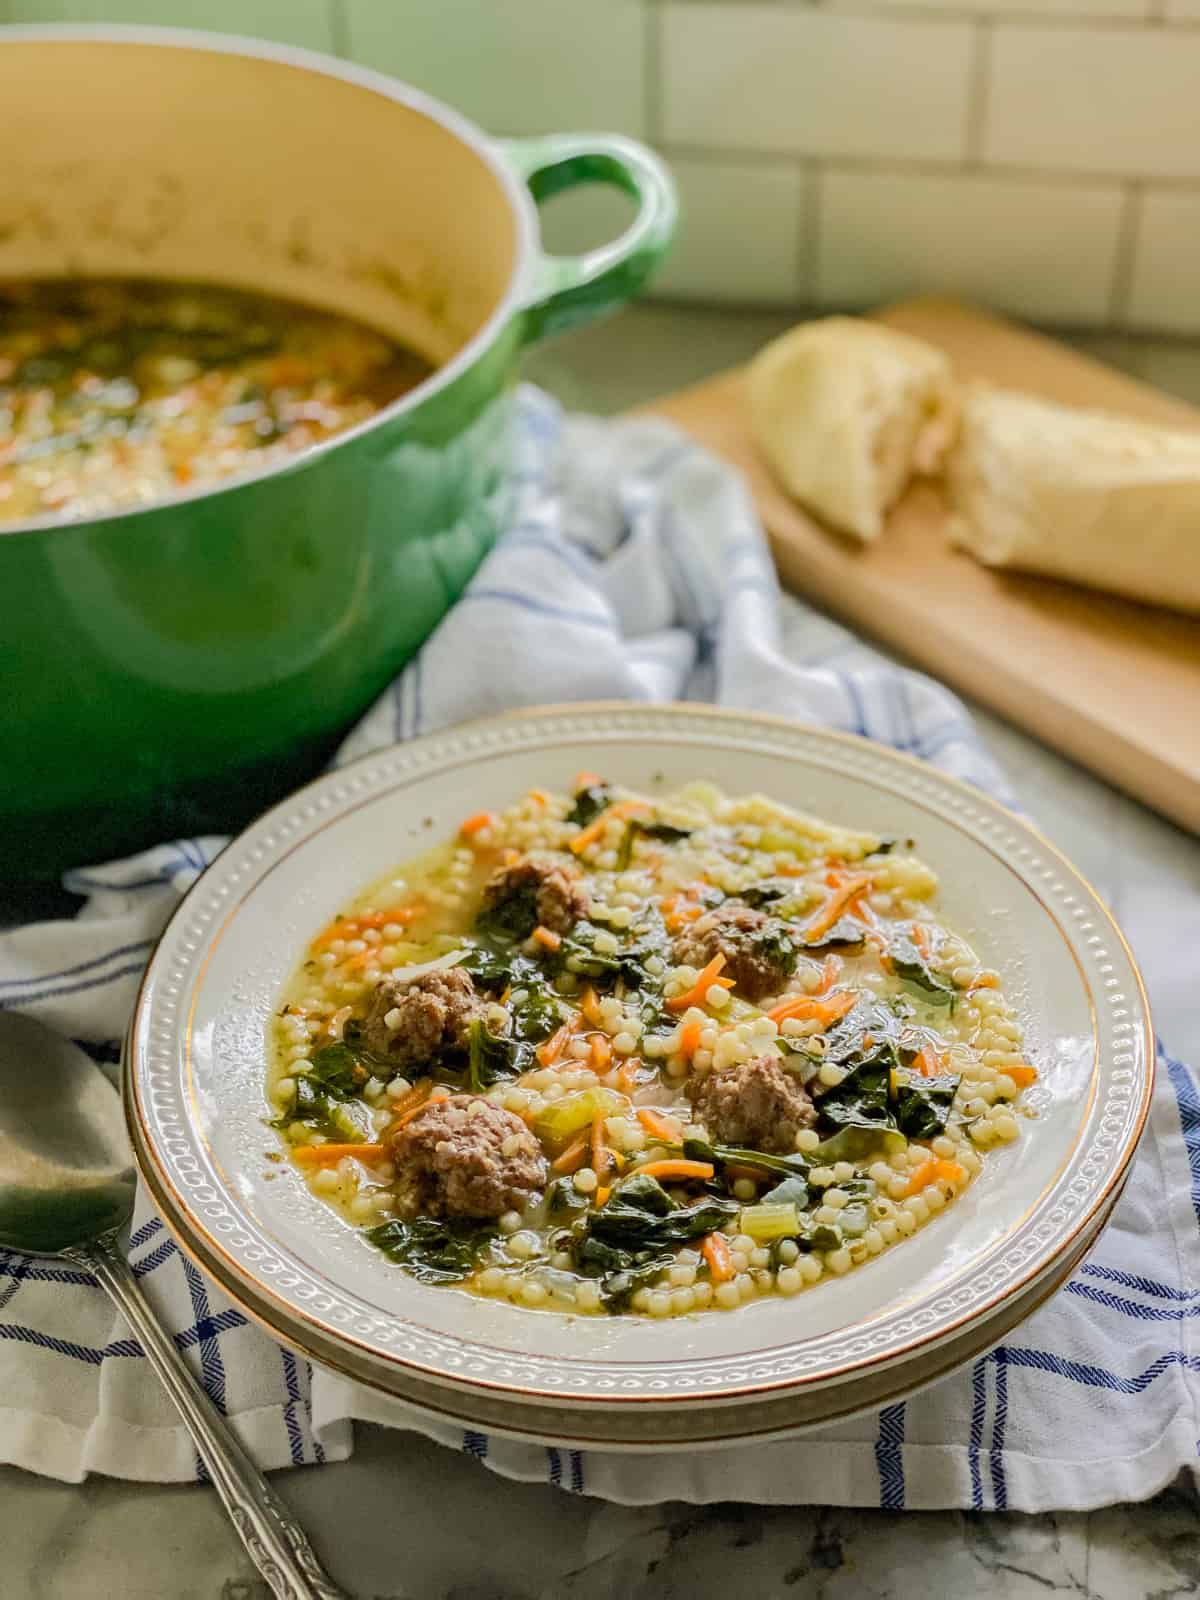 White bowl filled with meatball soup with green pot in background with a cutting board with a loaf of bread.